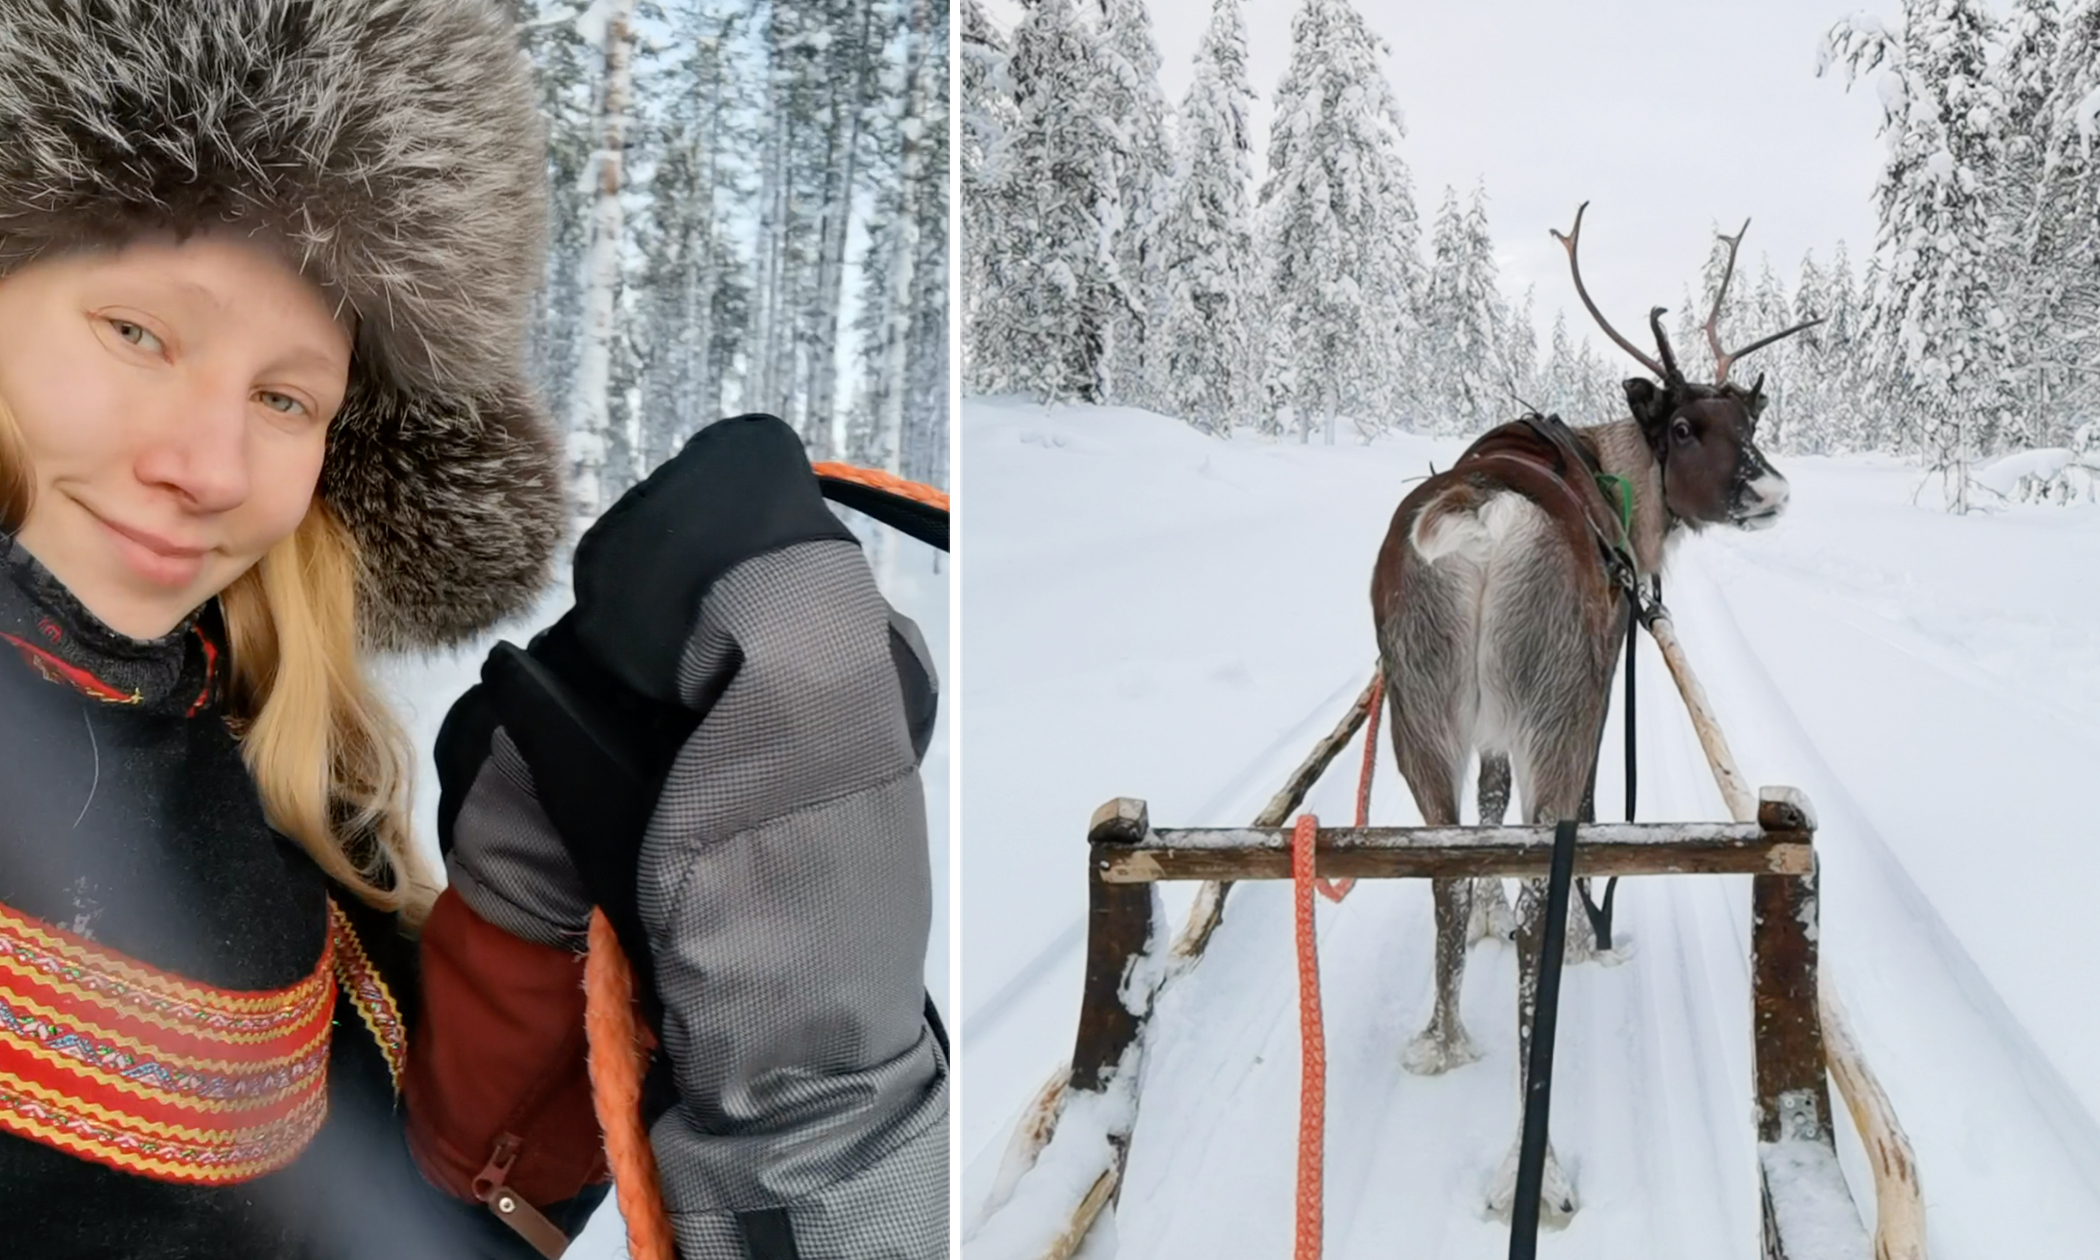 Woman From Finland Quits Her Job at a Restaurant After an Injury, Becomes a Reindeer Herder